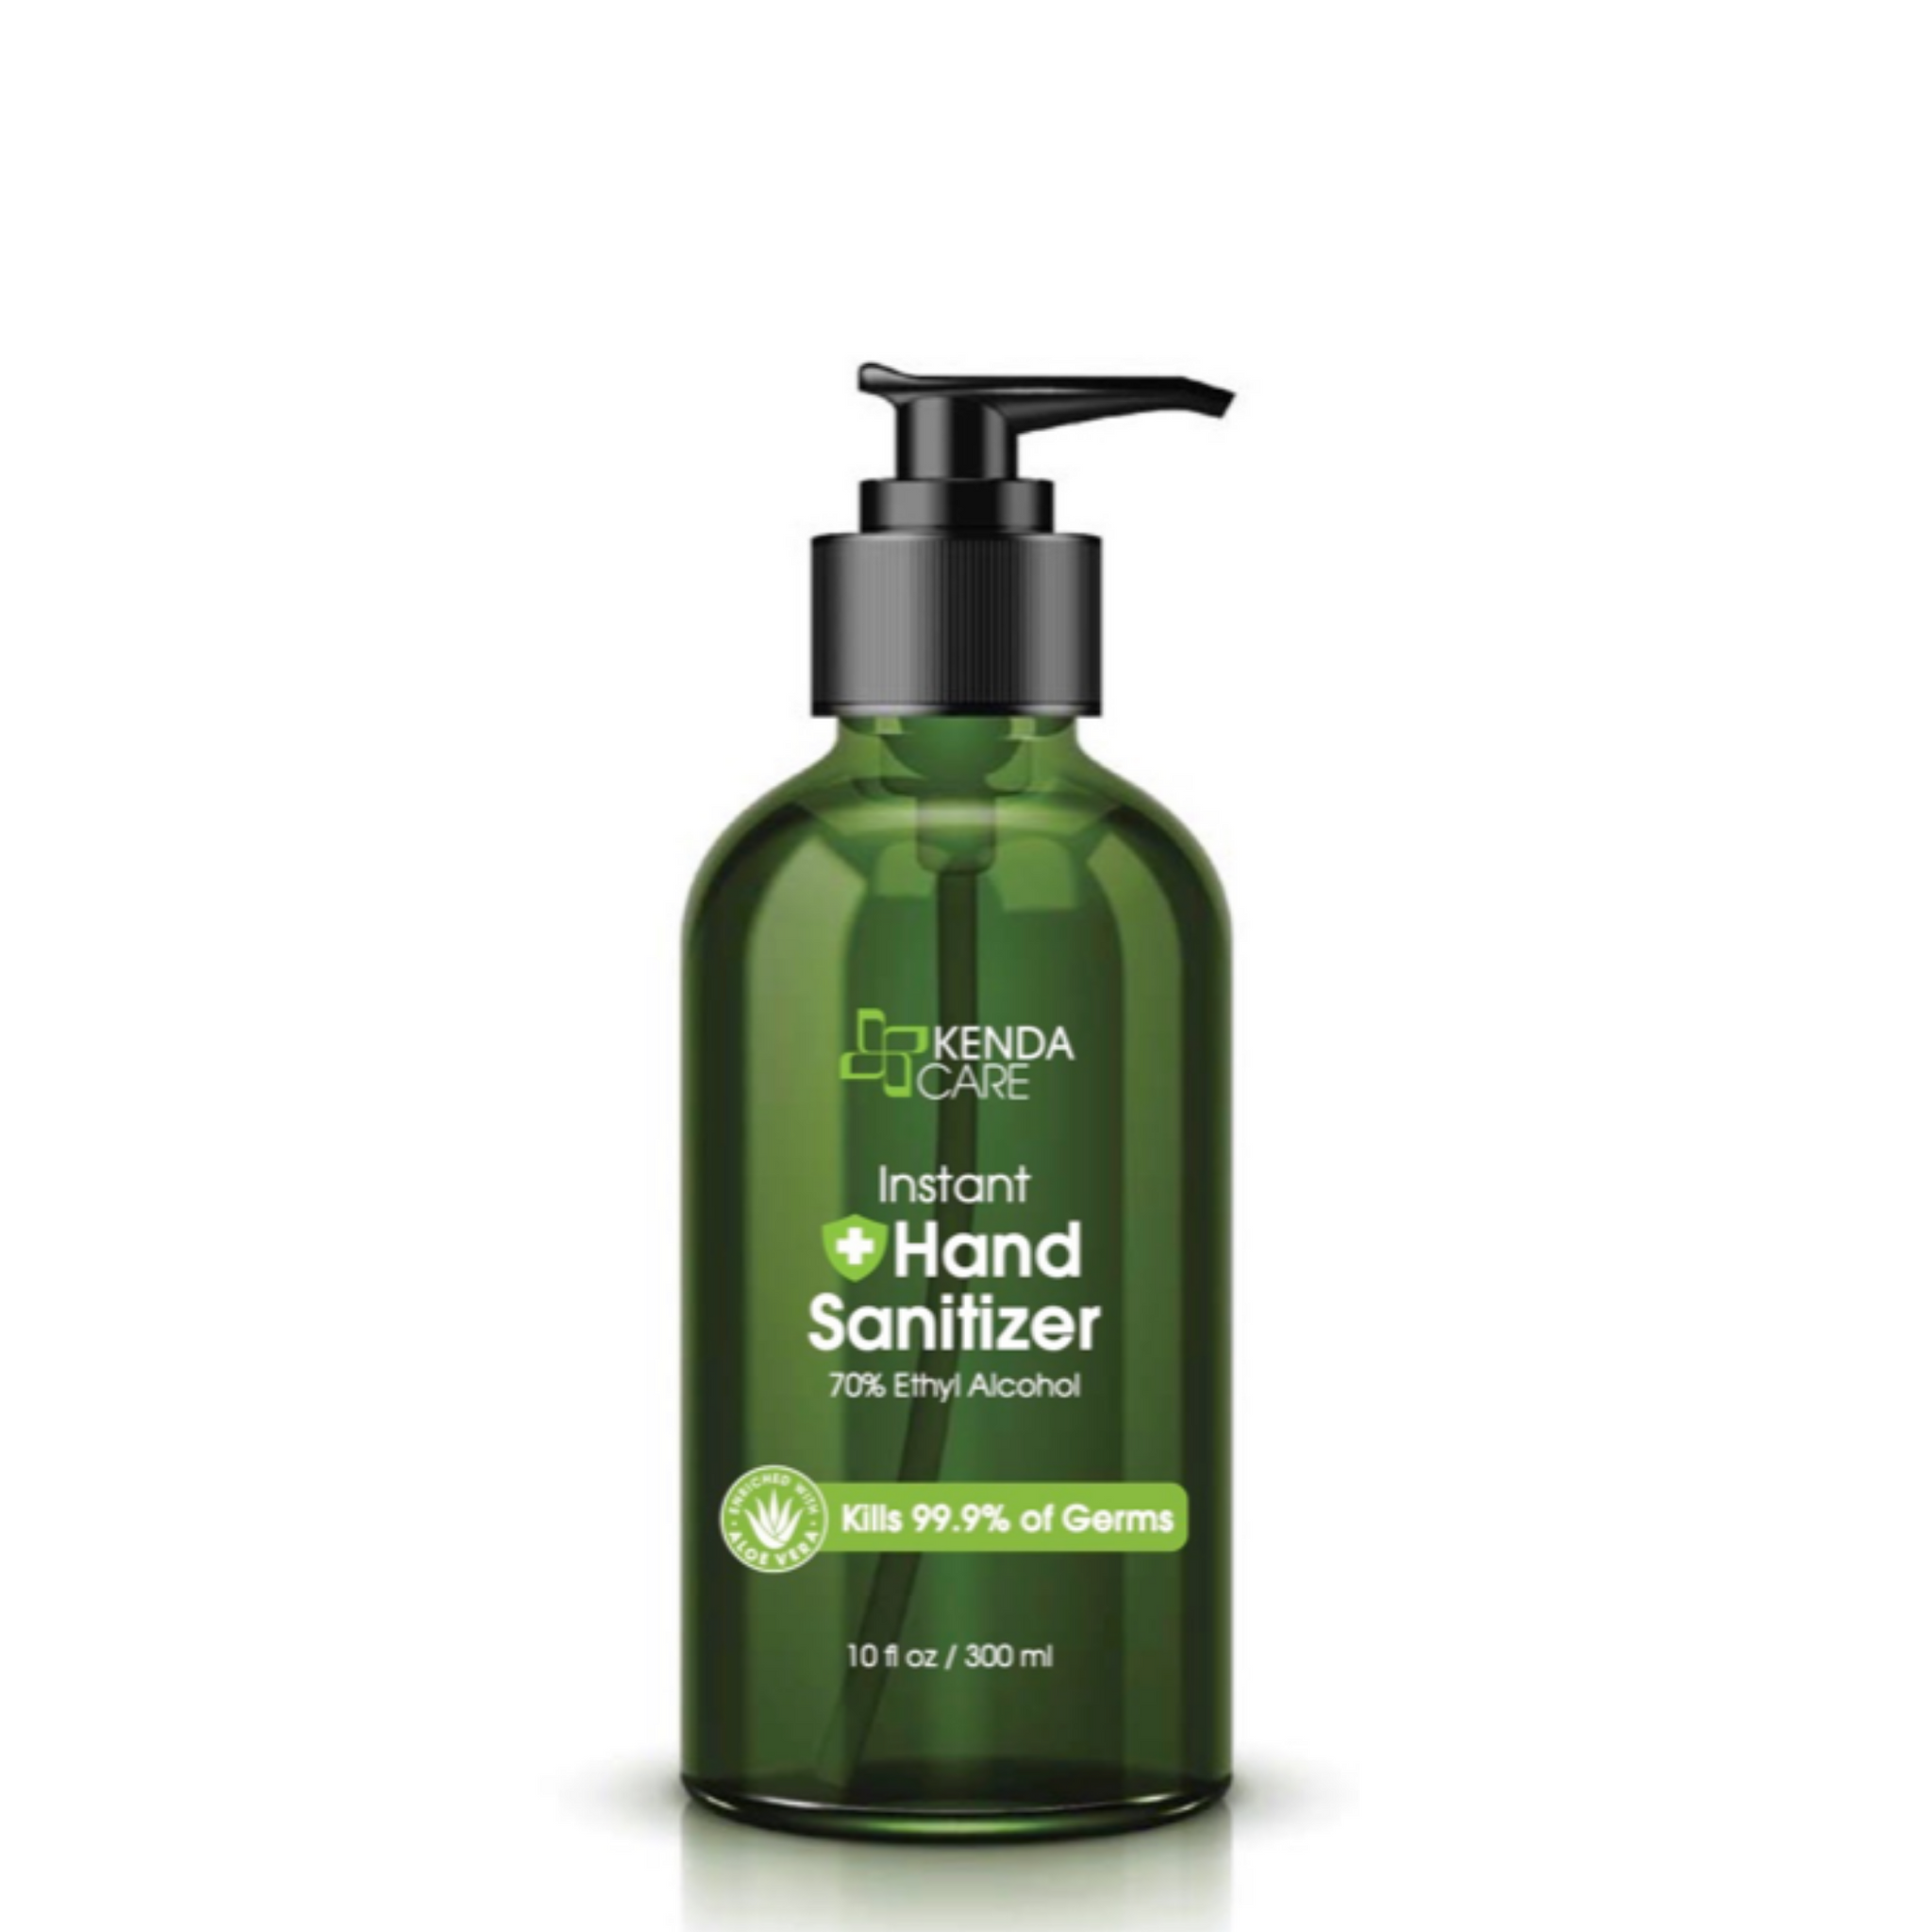 Kenda Care's alcohol based hand sanitizer contains 70% isopropanol. Optimized to kill 99.9% of germs. It keeps hands soft and moisturized without harming your skin. Click to learn more and purchase.